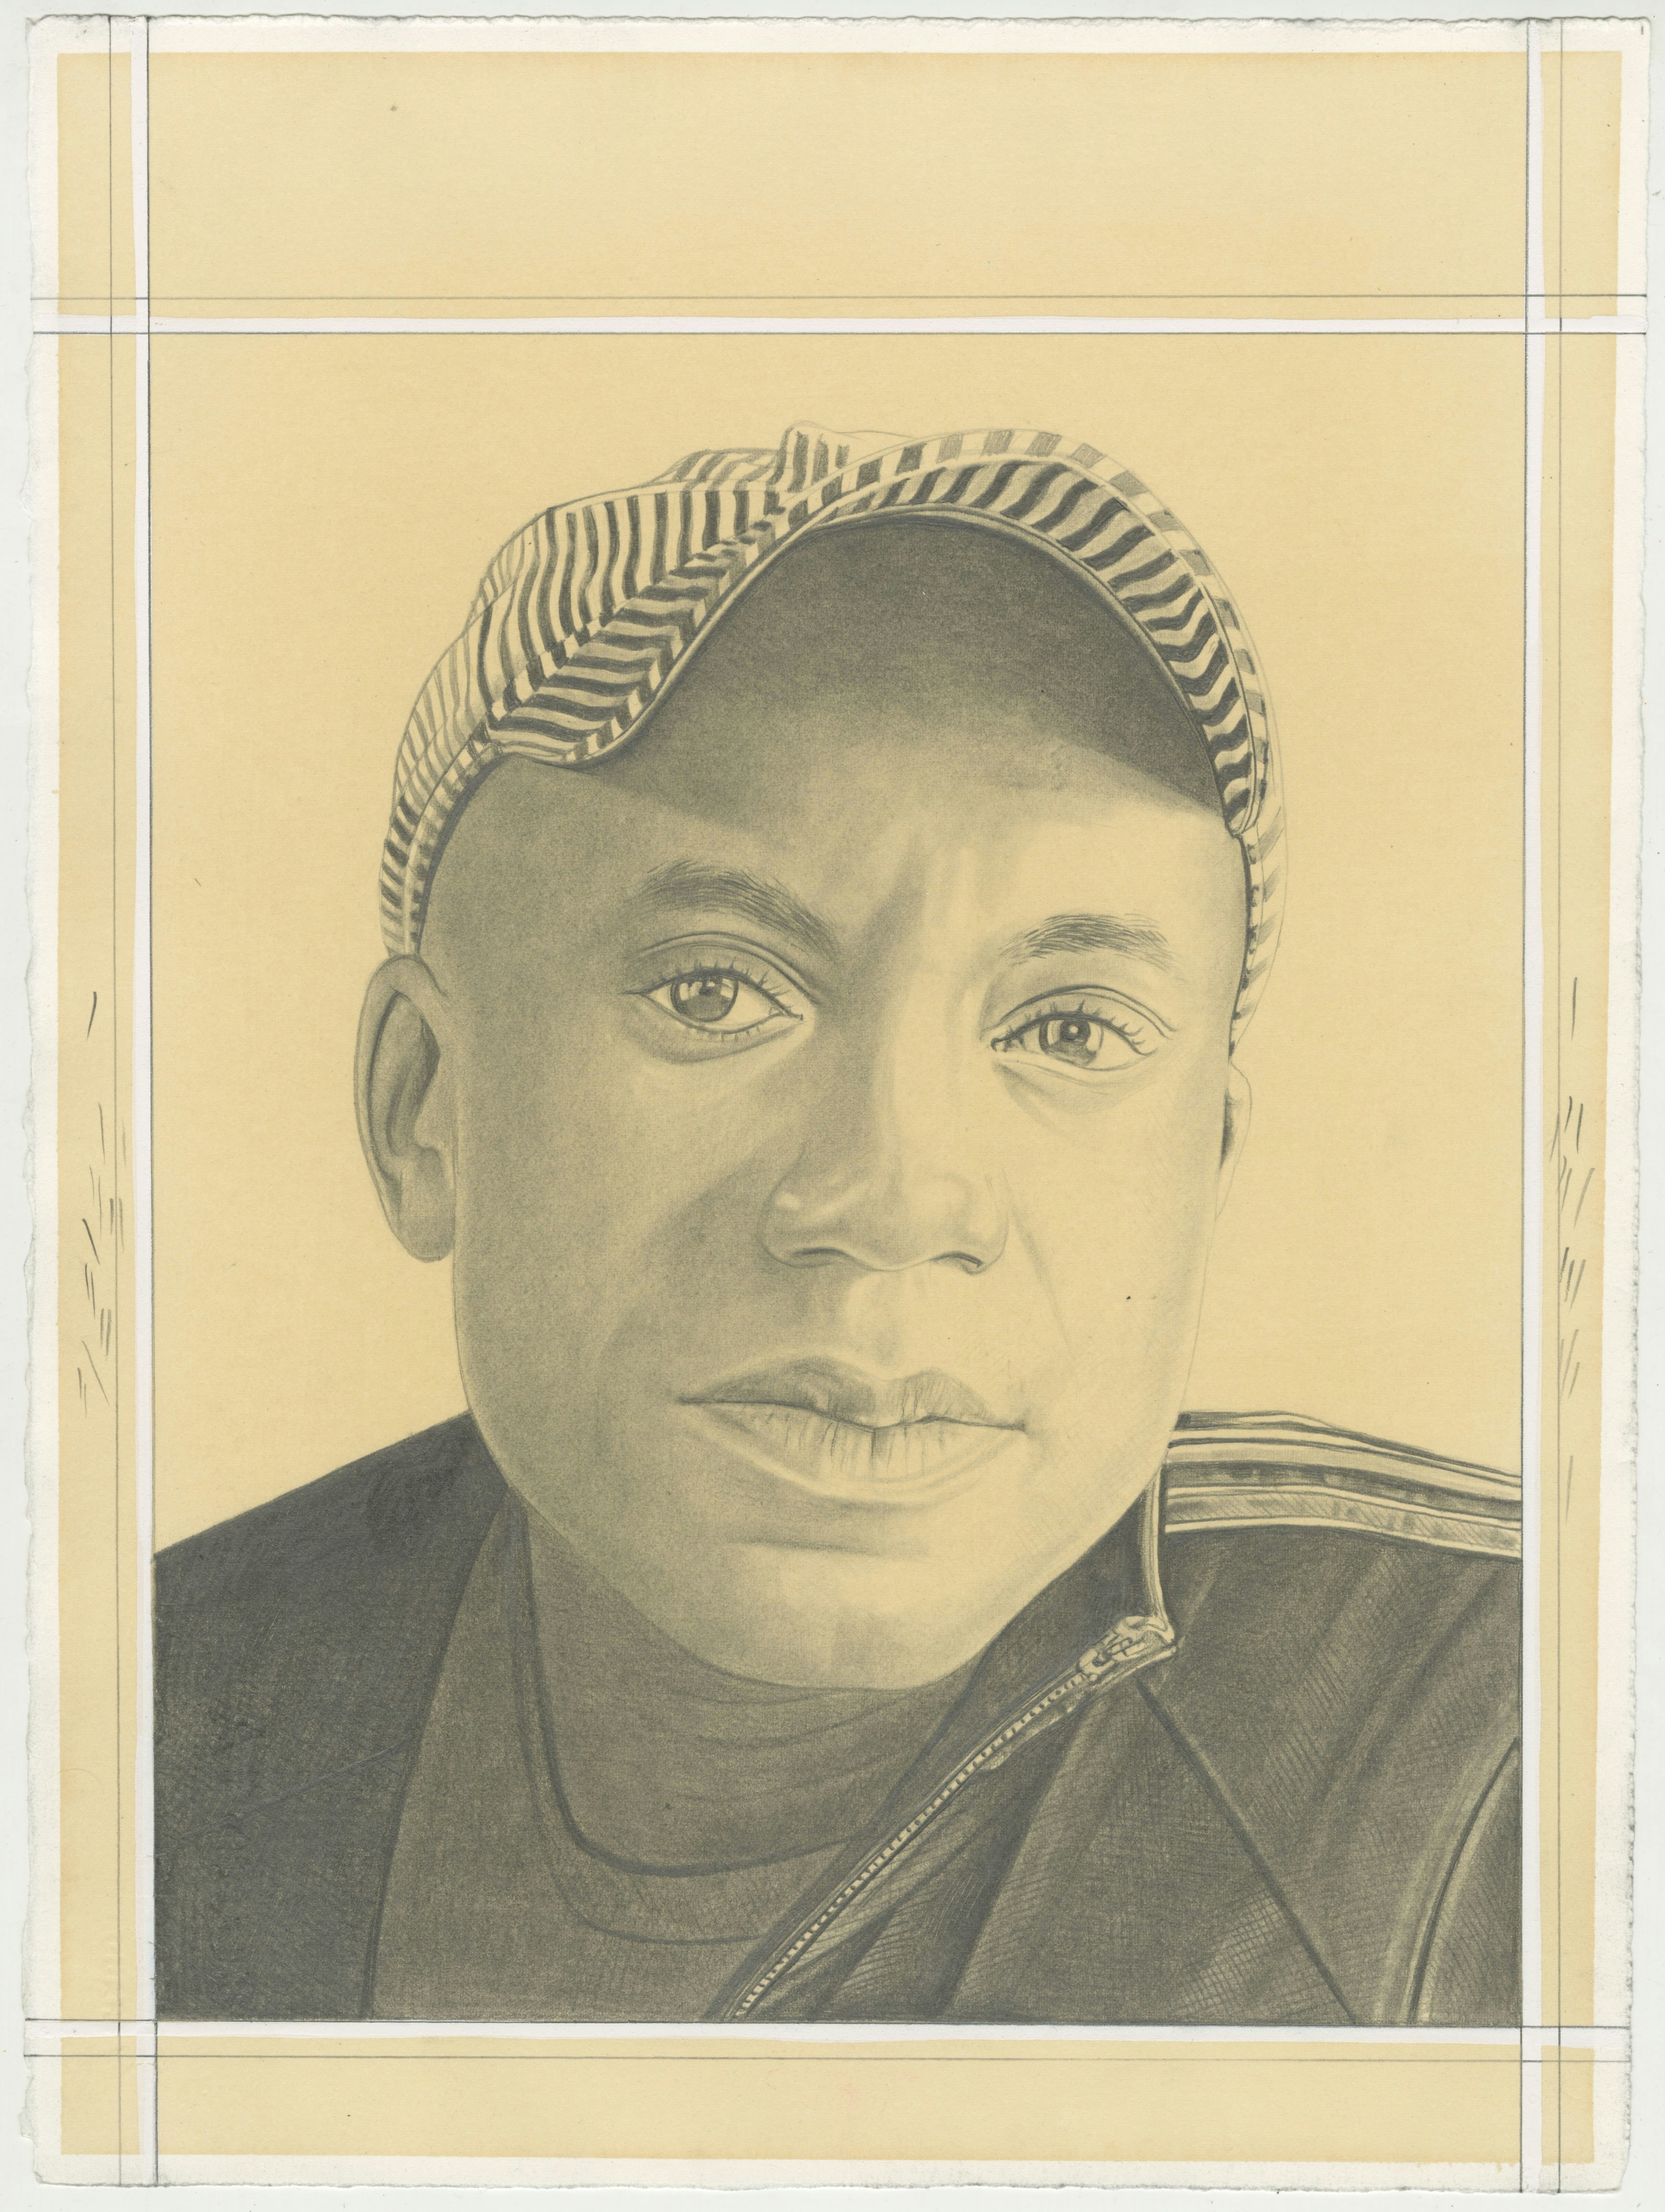 Odili Donald Odata, pencil on paper by Phong H. Bui. 